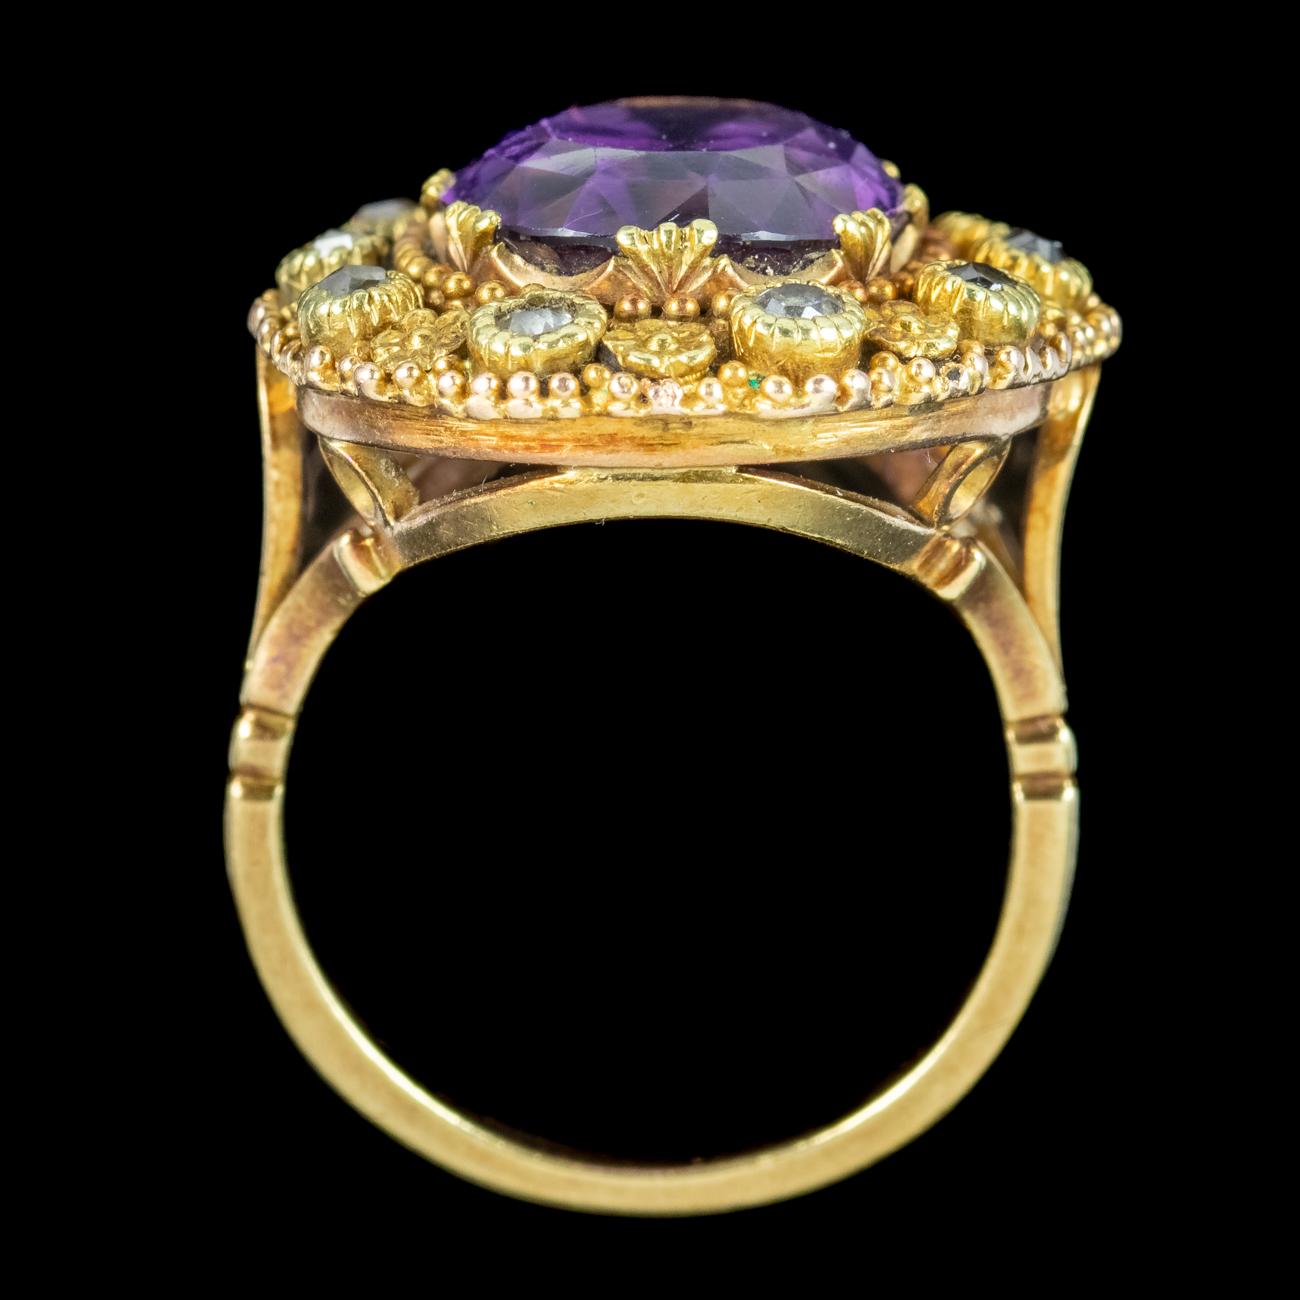 Antique Victorian Amethyst Diamond Ring 7.2ct Amethyst For Sale 1